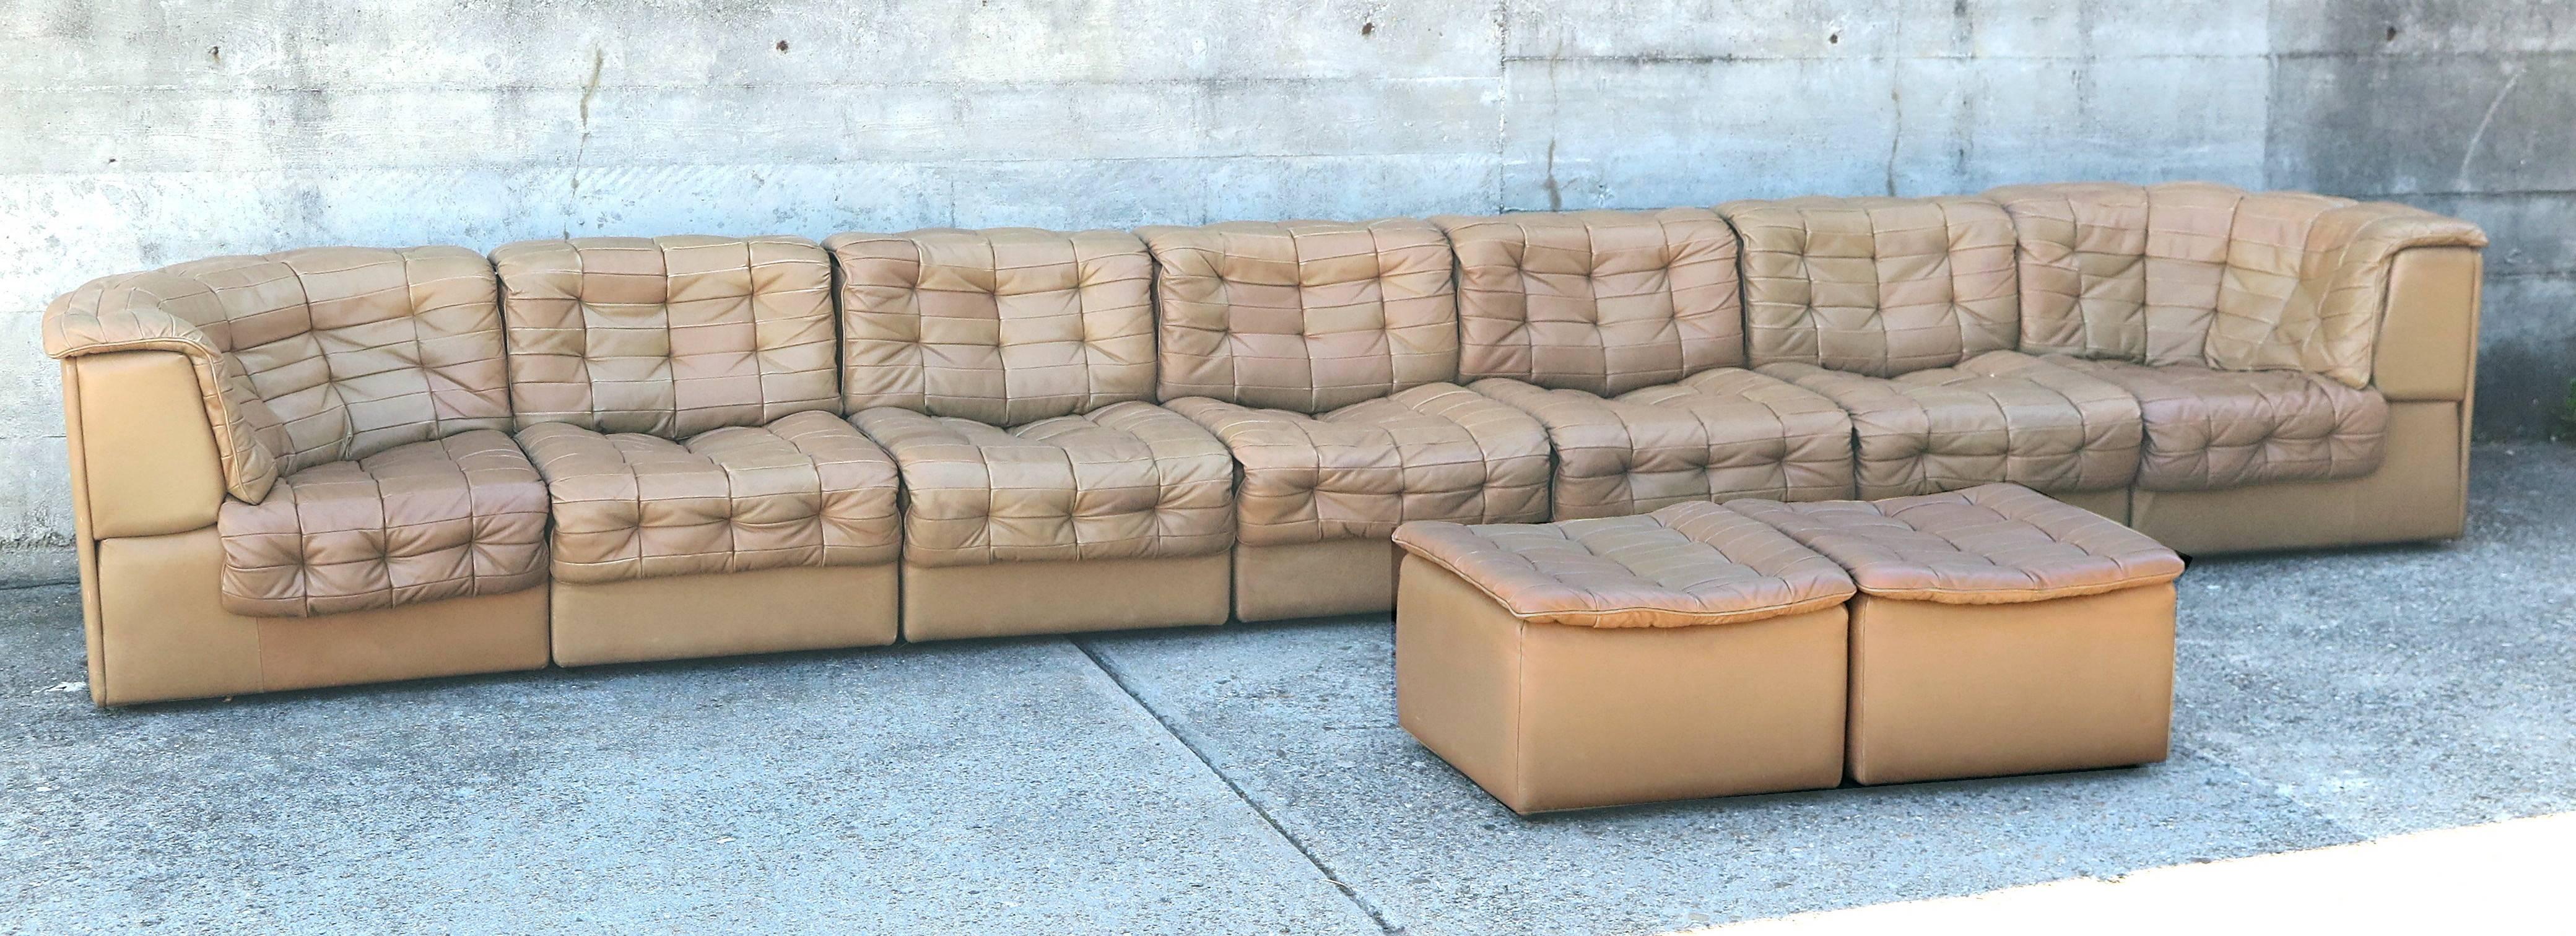 De Sede Light Brown Leather Modular Sofa, 7 Seats + 2 Ottoman In Good Condition For Sale In Bern, CH